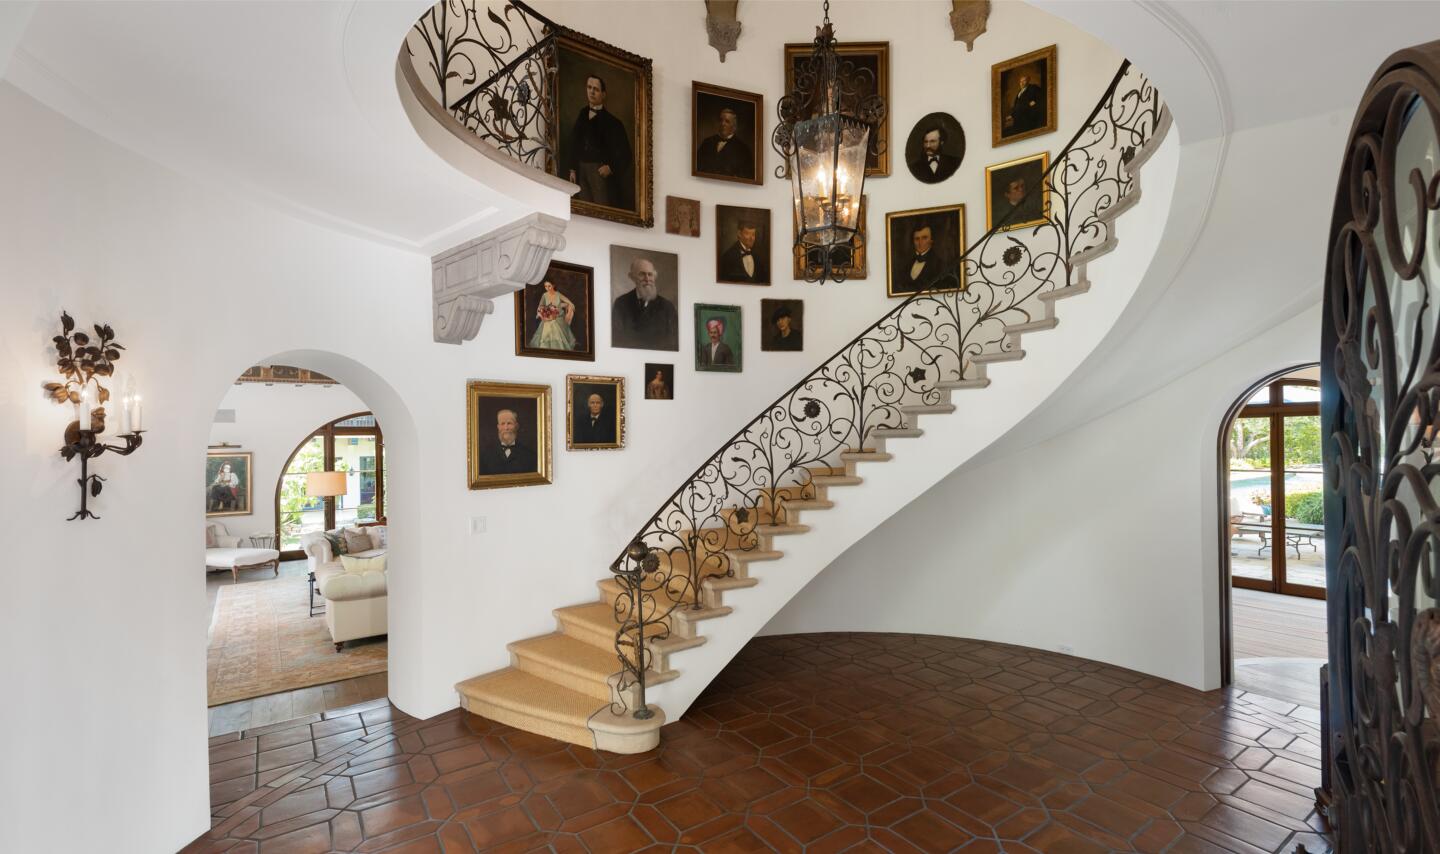 The foyer with winding staircase and tile floors.